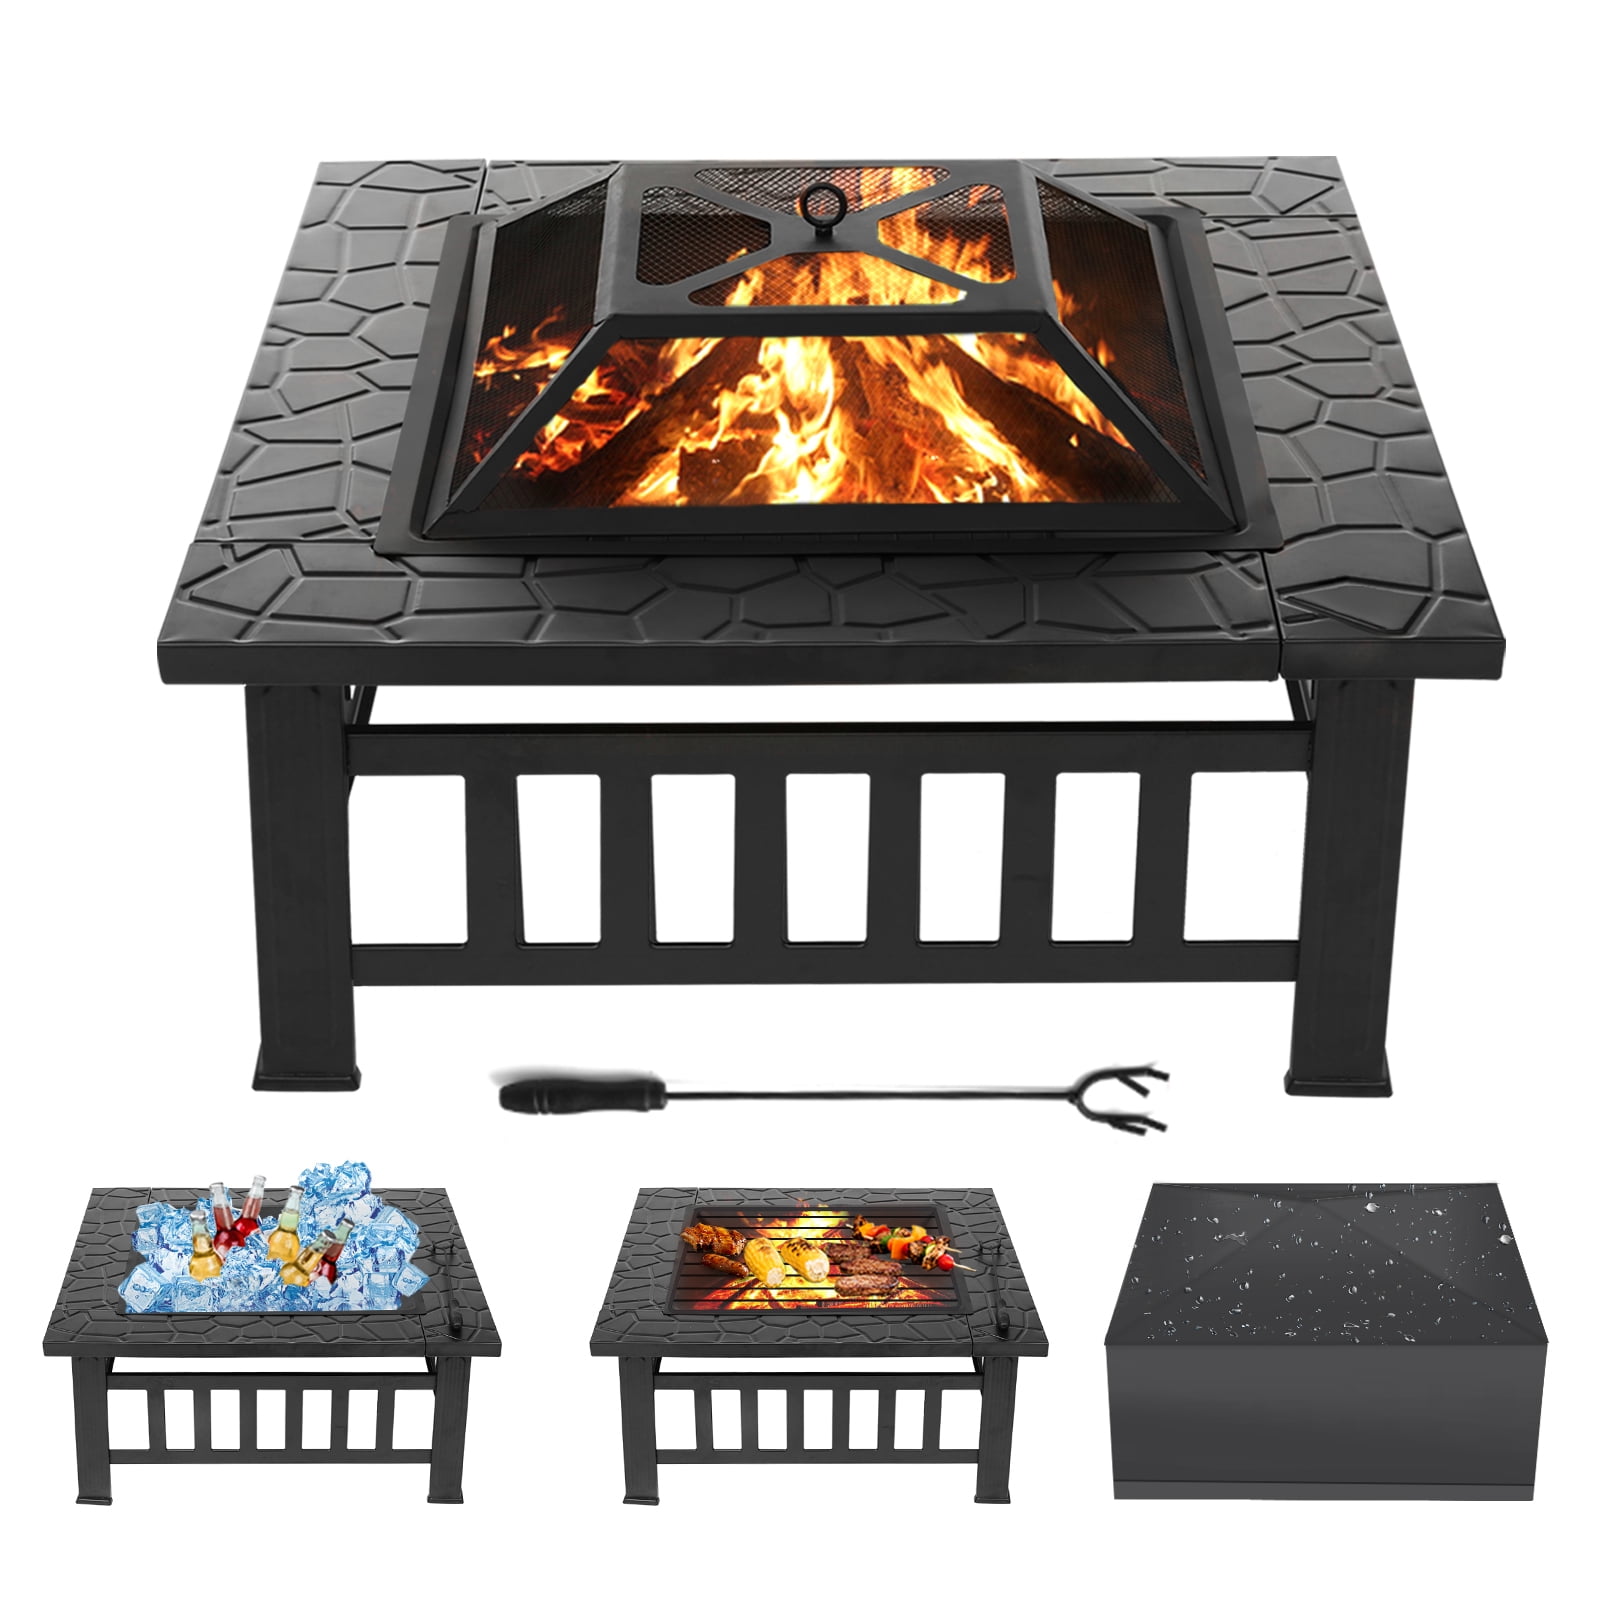 32" Metal Firepit Patio Backyard Garden Square Stove W/Cover Fire Pit Outdoor 